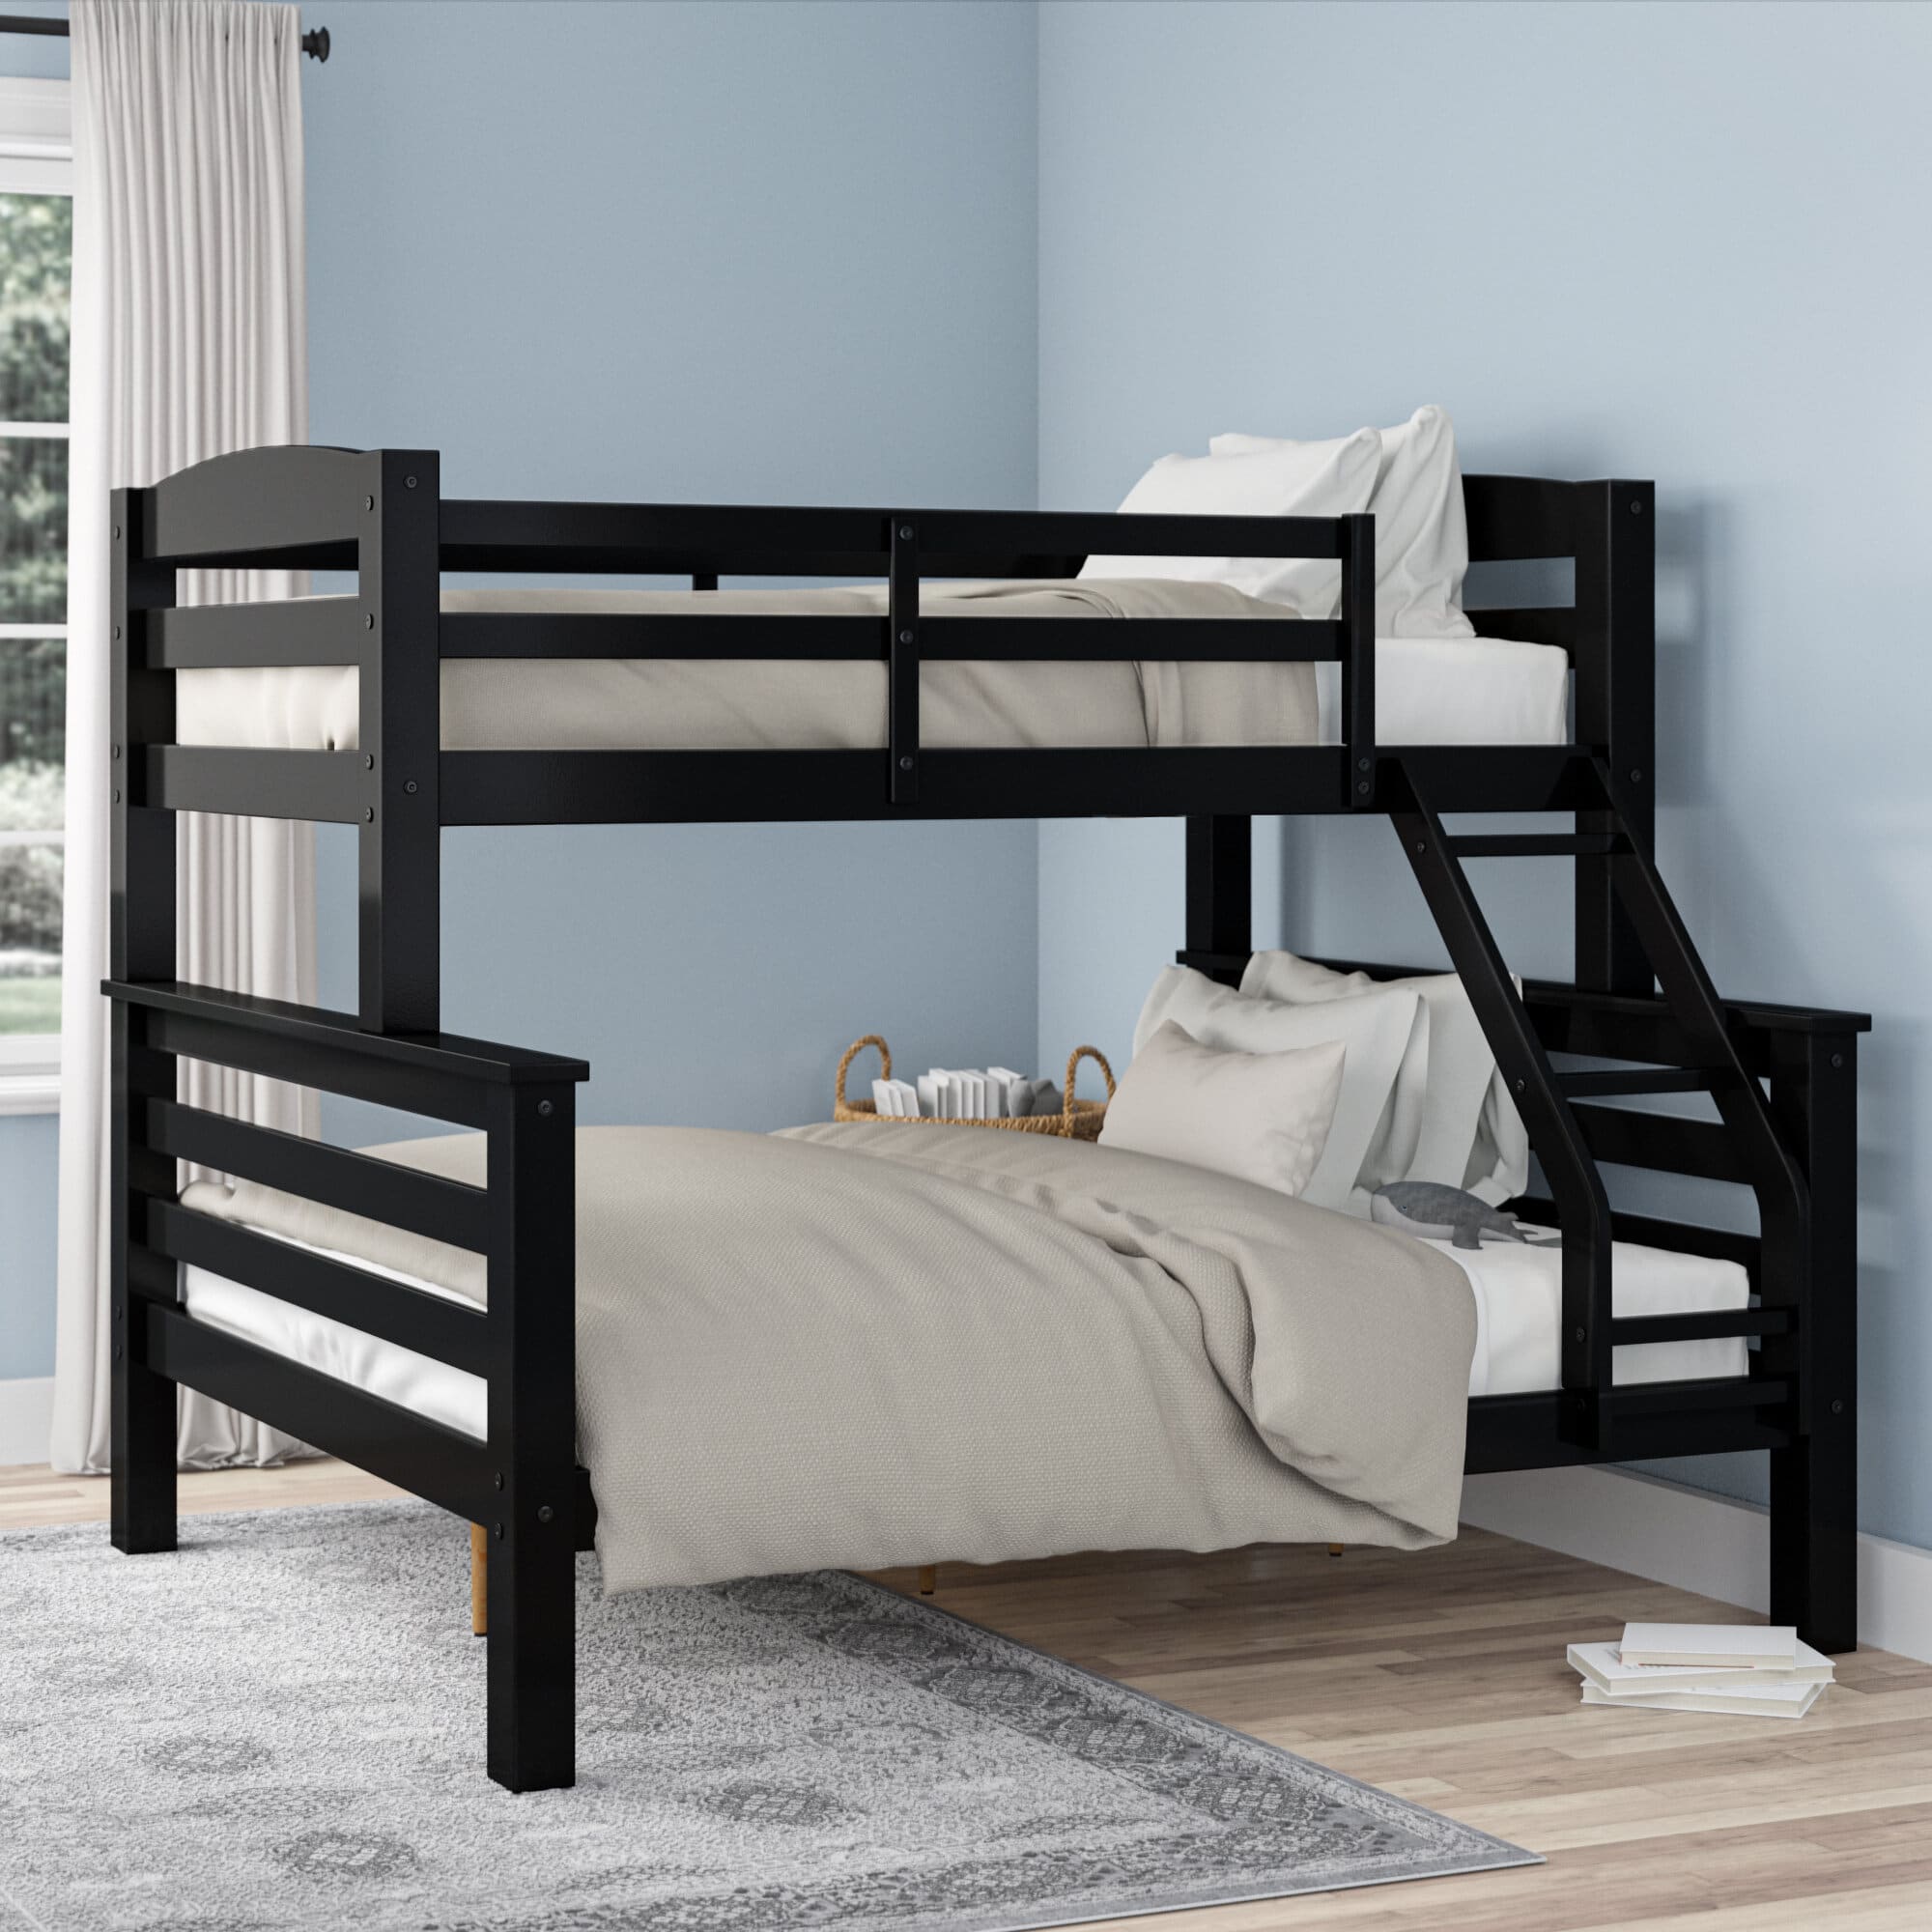 6 Best Twin Over Full Bunk Beds May, Full Over Full Bunk Beds That Separate